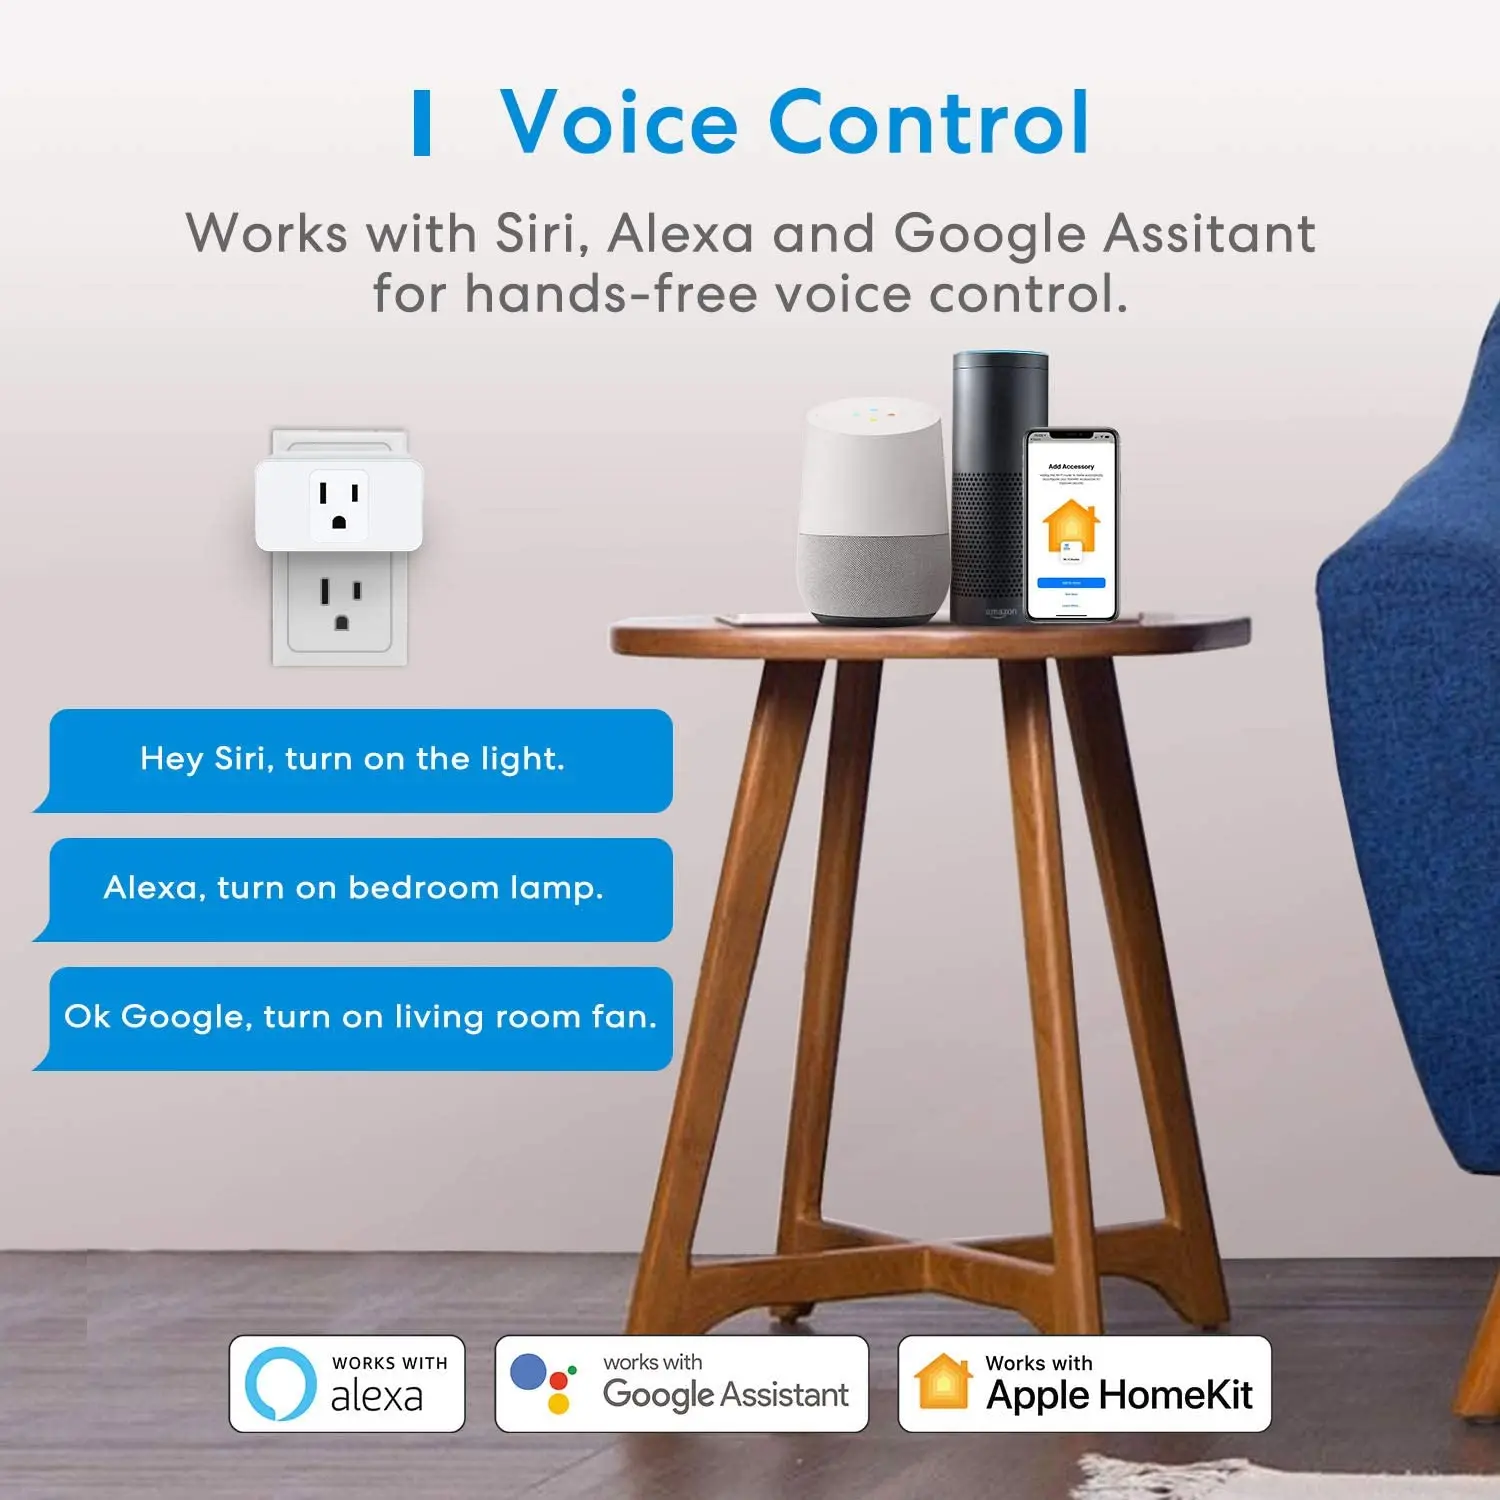 Meross Smart Plug Mini, 15A WiFi Bluetooth Outlet Socket Compatible with Alexa, Google Assistant, Voice & App Remote Control, Timer, Offline Control